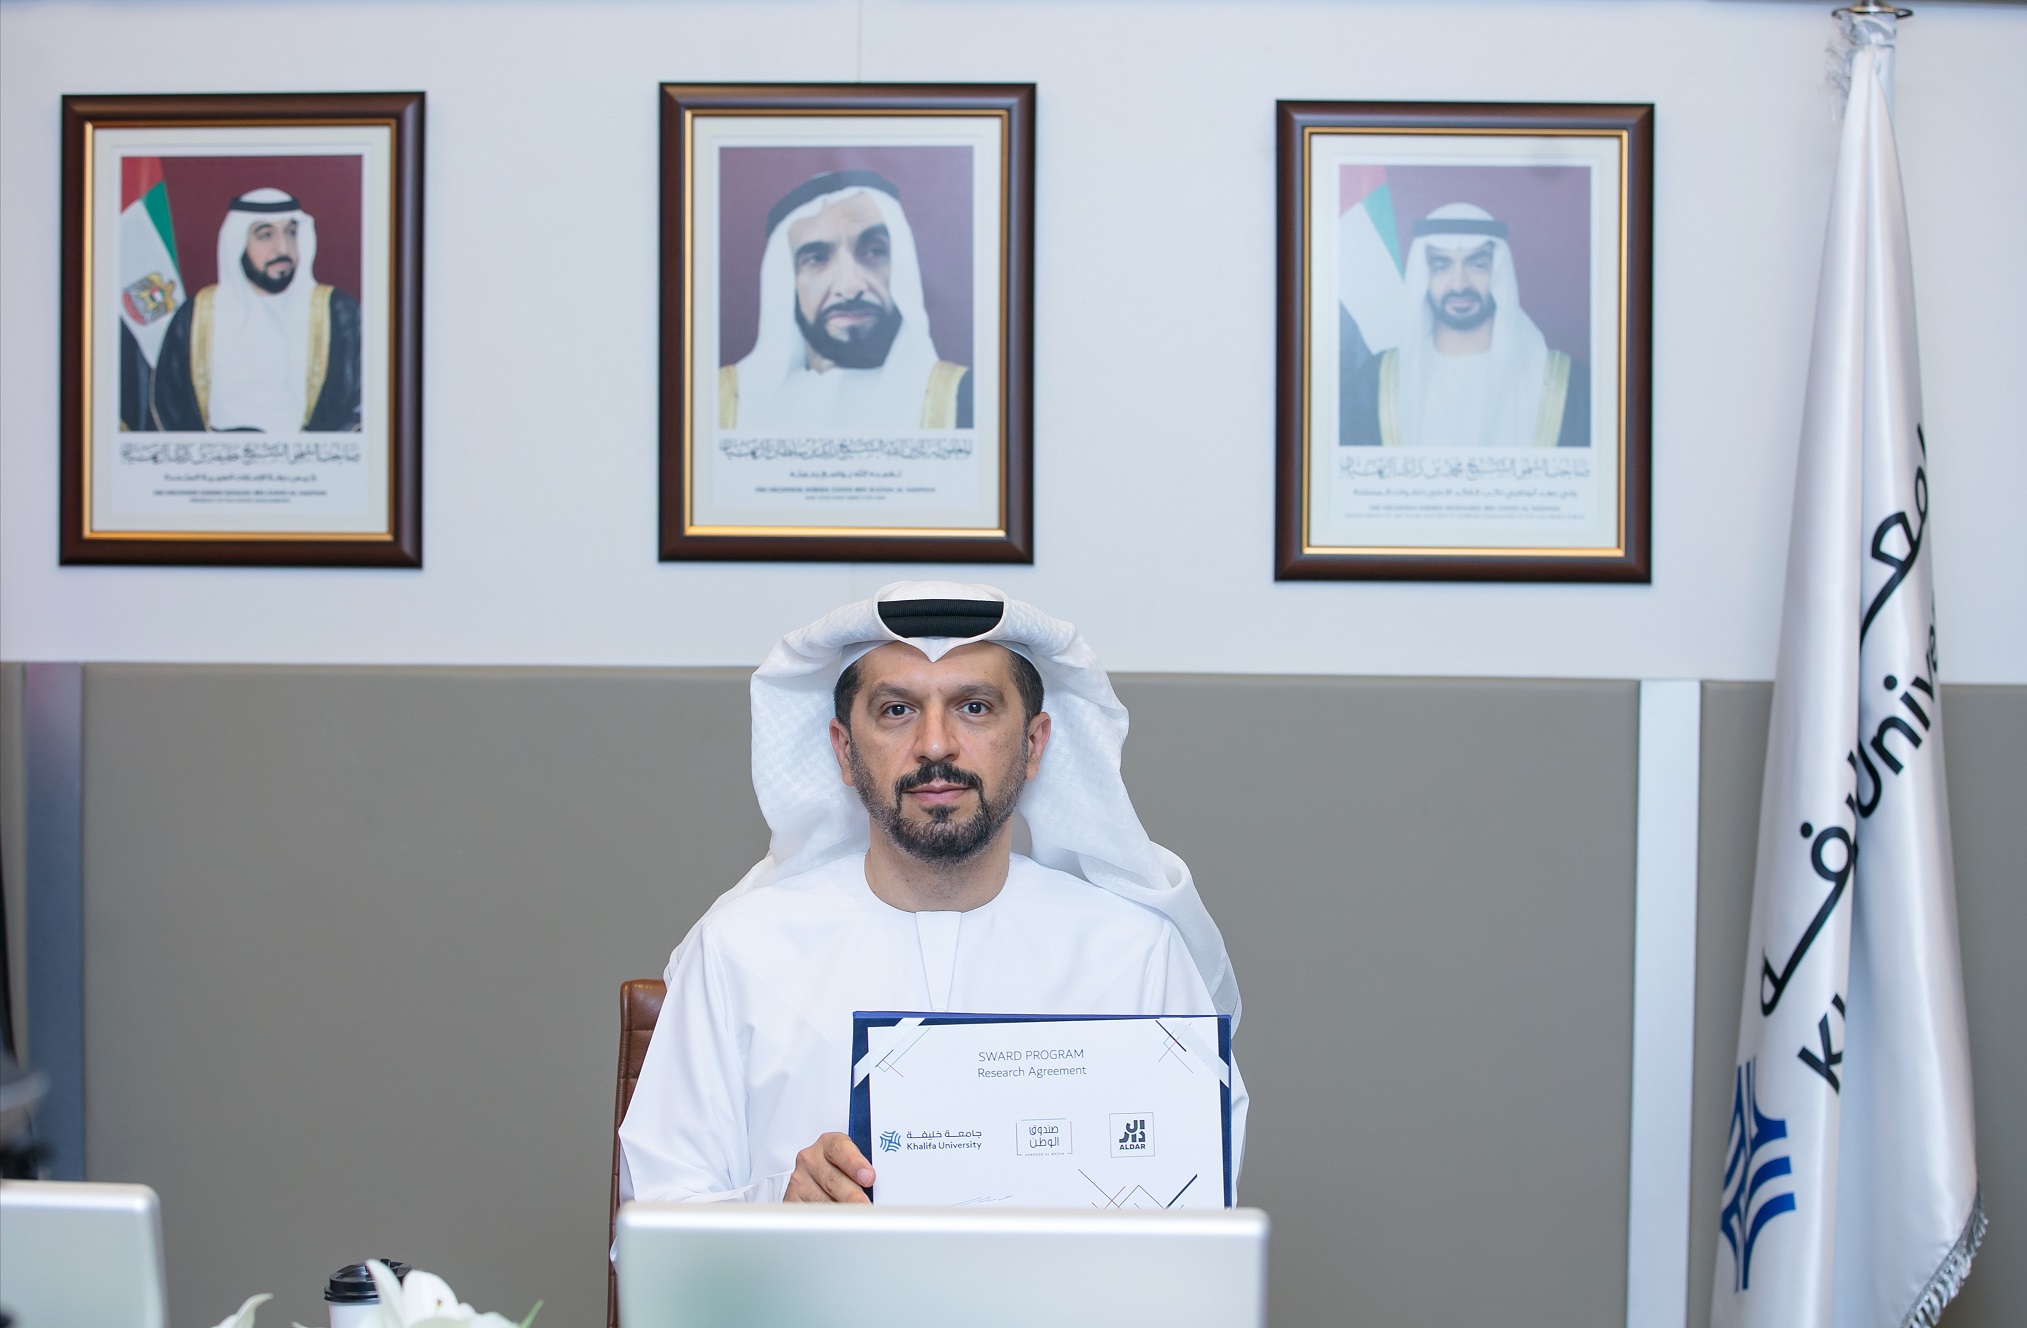 Khalifa University Signs A Co-Funded Research Agreement With Aldar Properties And Sandooq Al Watan To Make Reusable Contact Lenses For Color Blindness